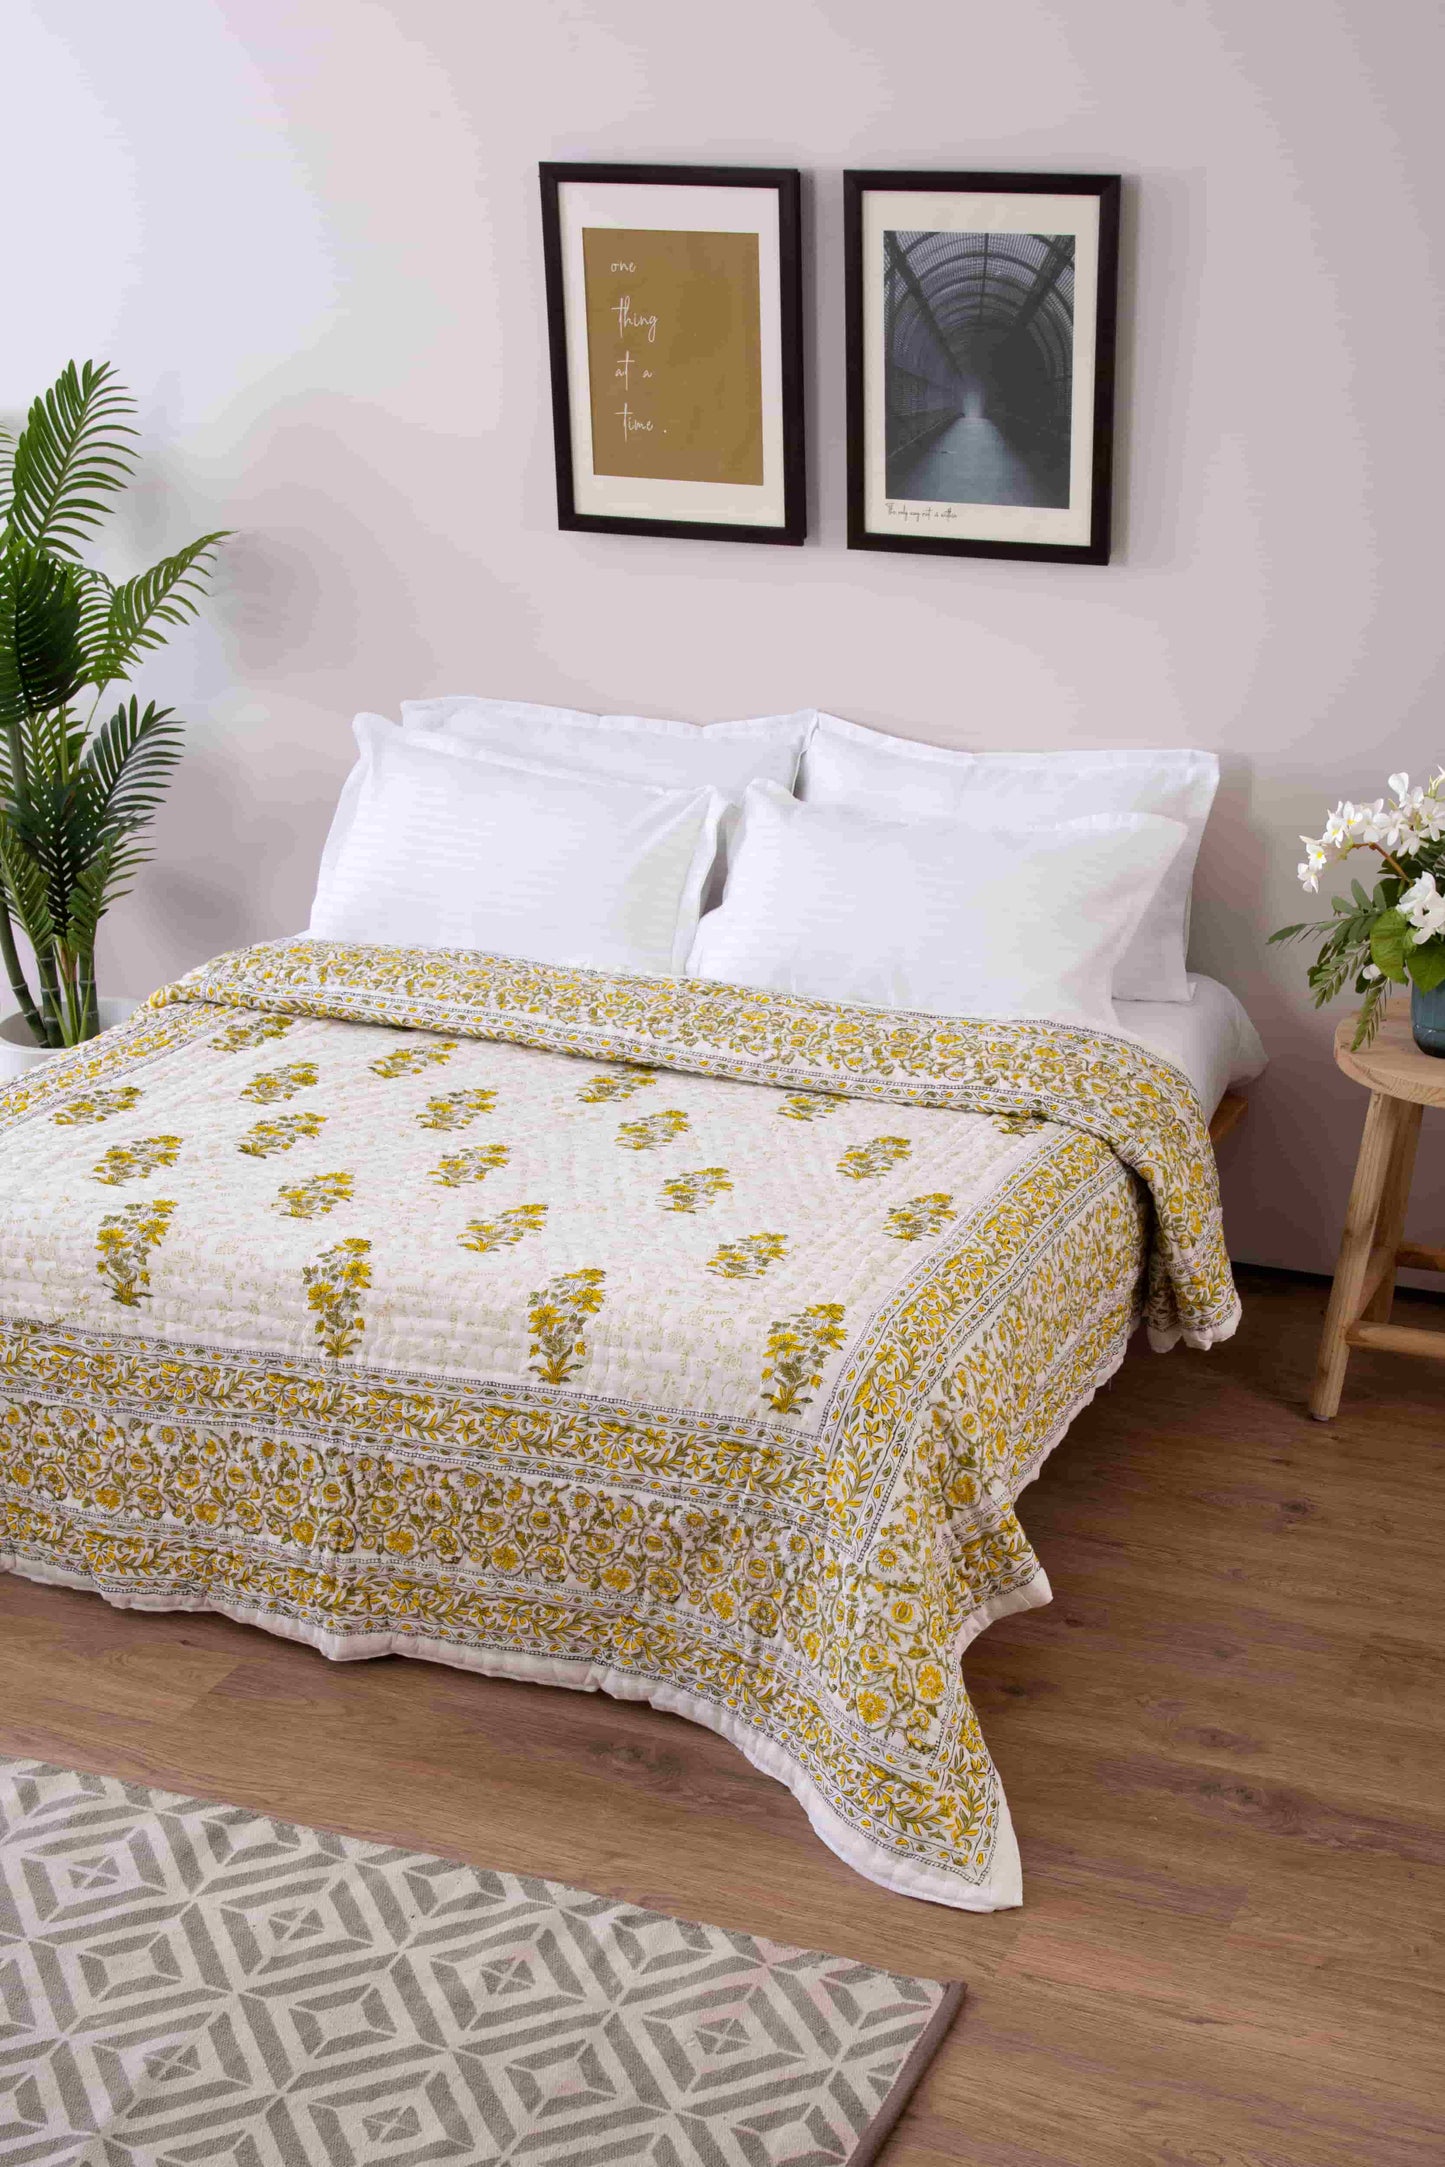 Traditional block printed jaipuri quilt razai, handmade by the local artisans. comes in double and single bed